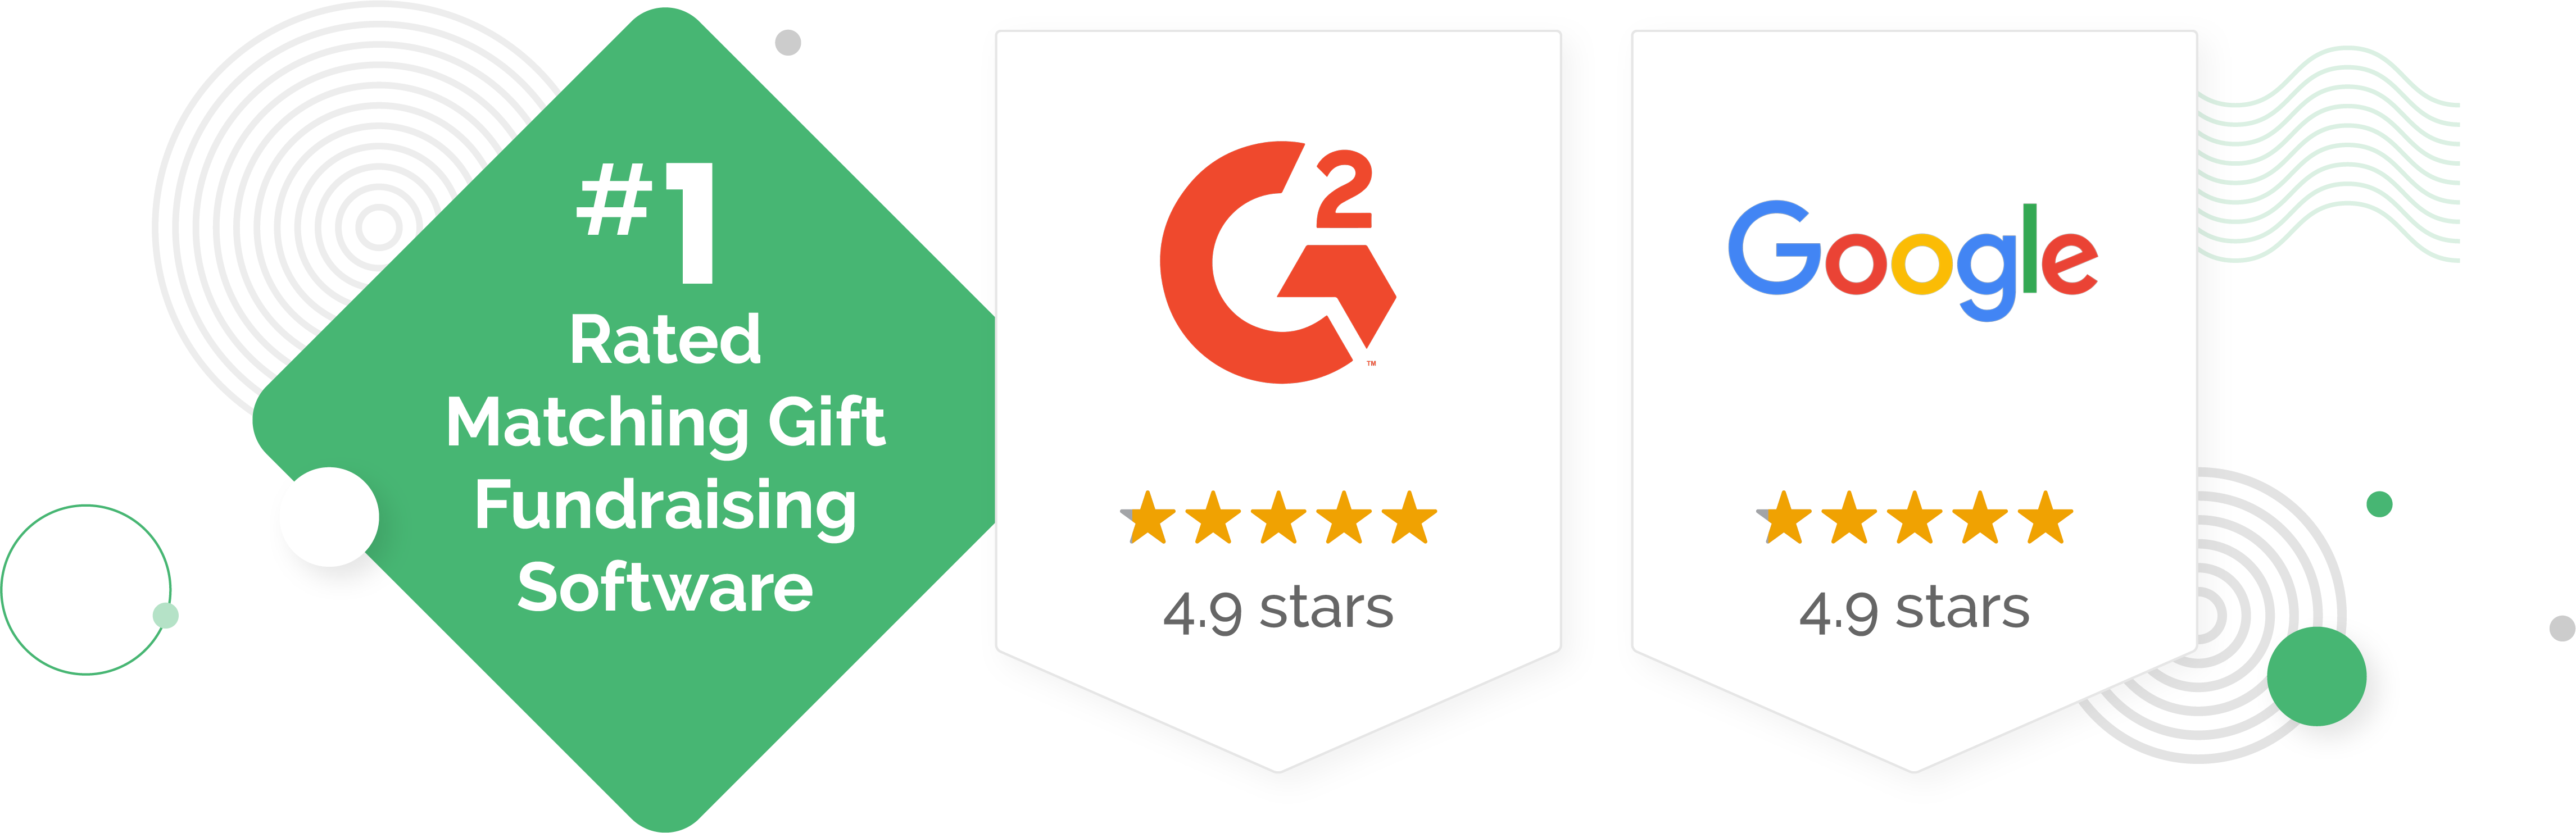 Image displays 5-star ratings for 360MatchPro